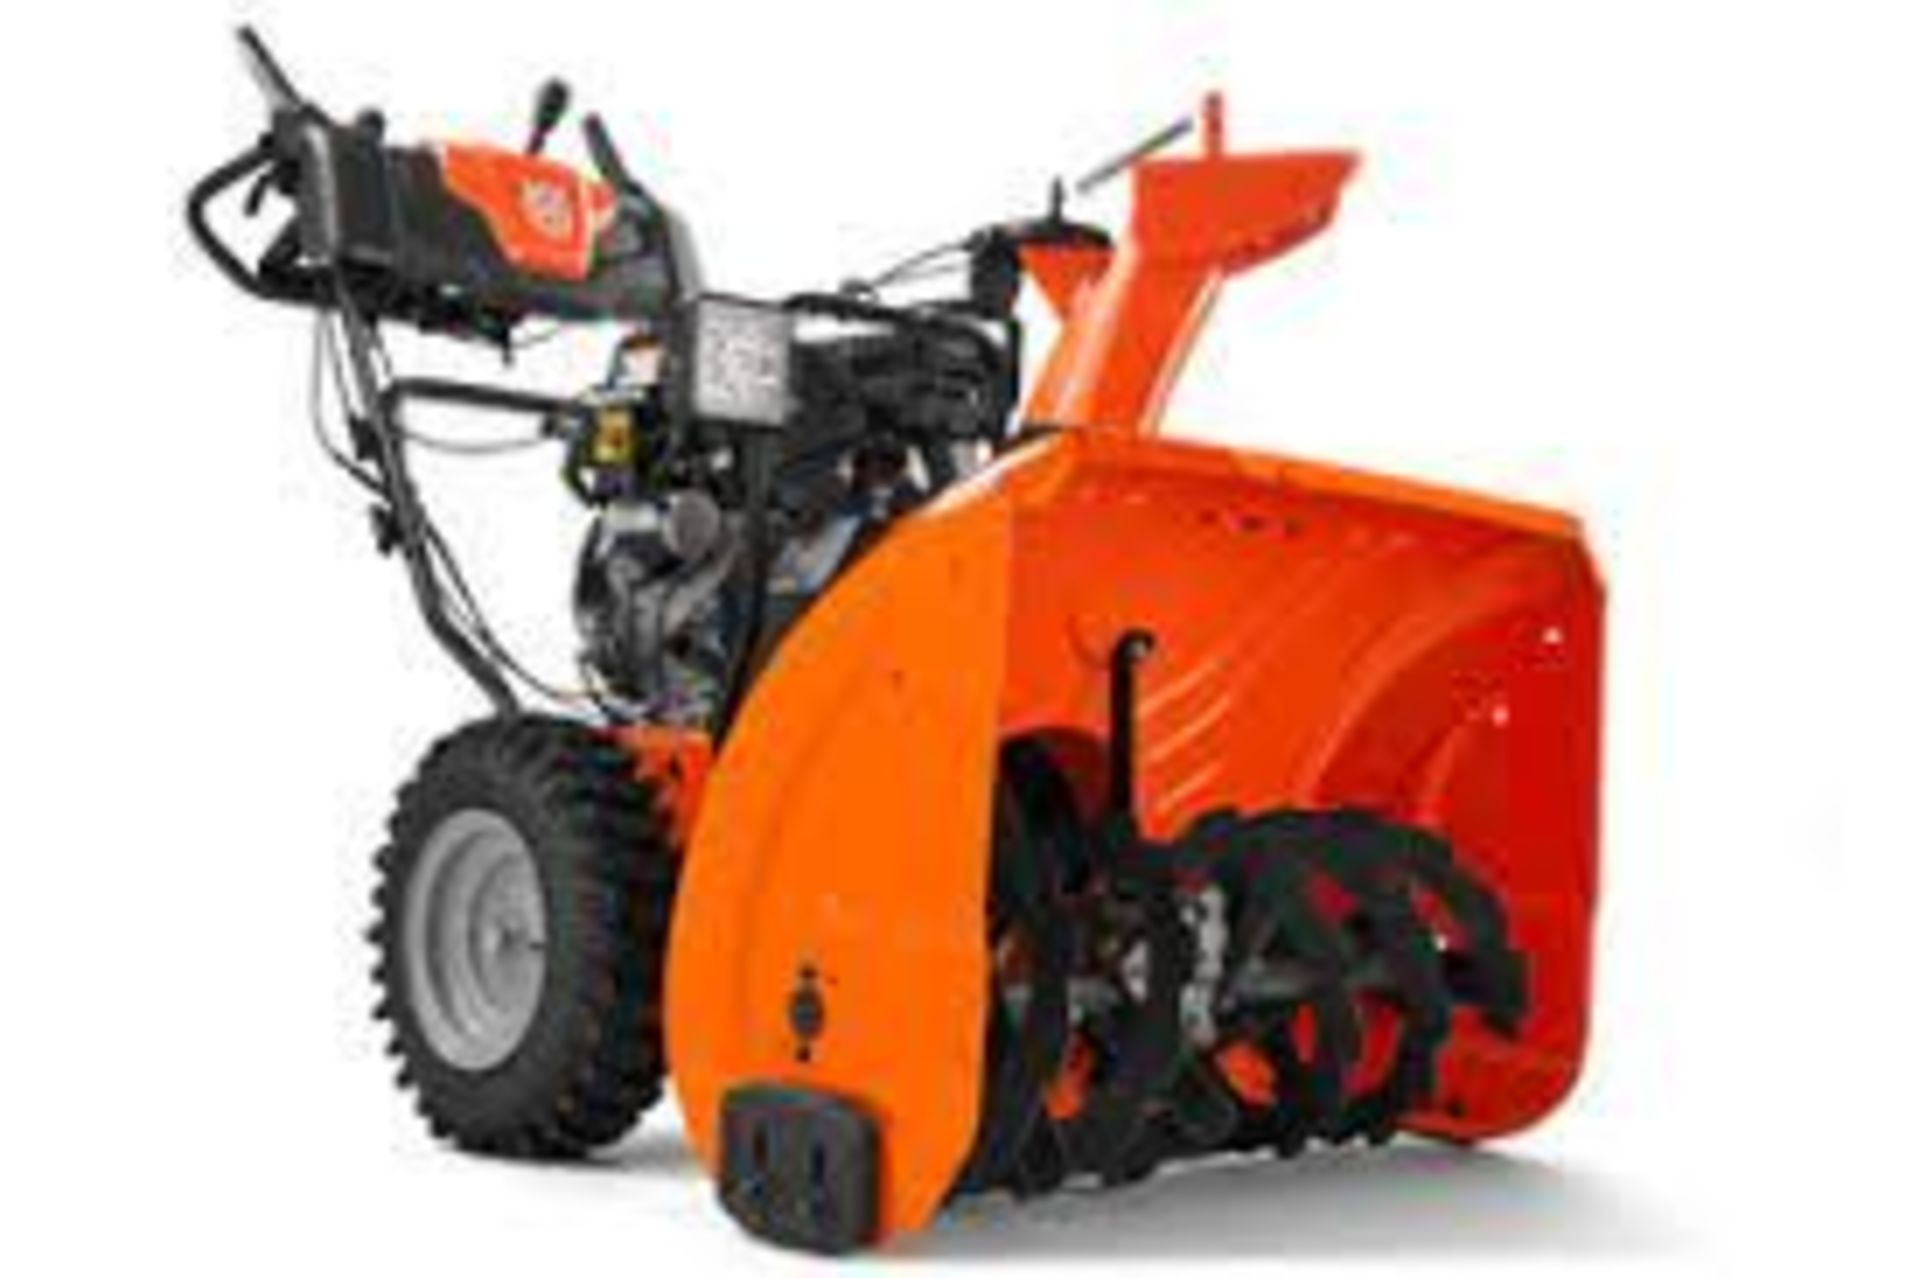 Husqvarna ST 230P Self Propelled Snow Blower - Approx MSRP $1299 - Image 2 of 5